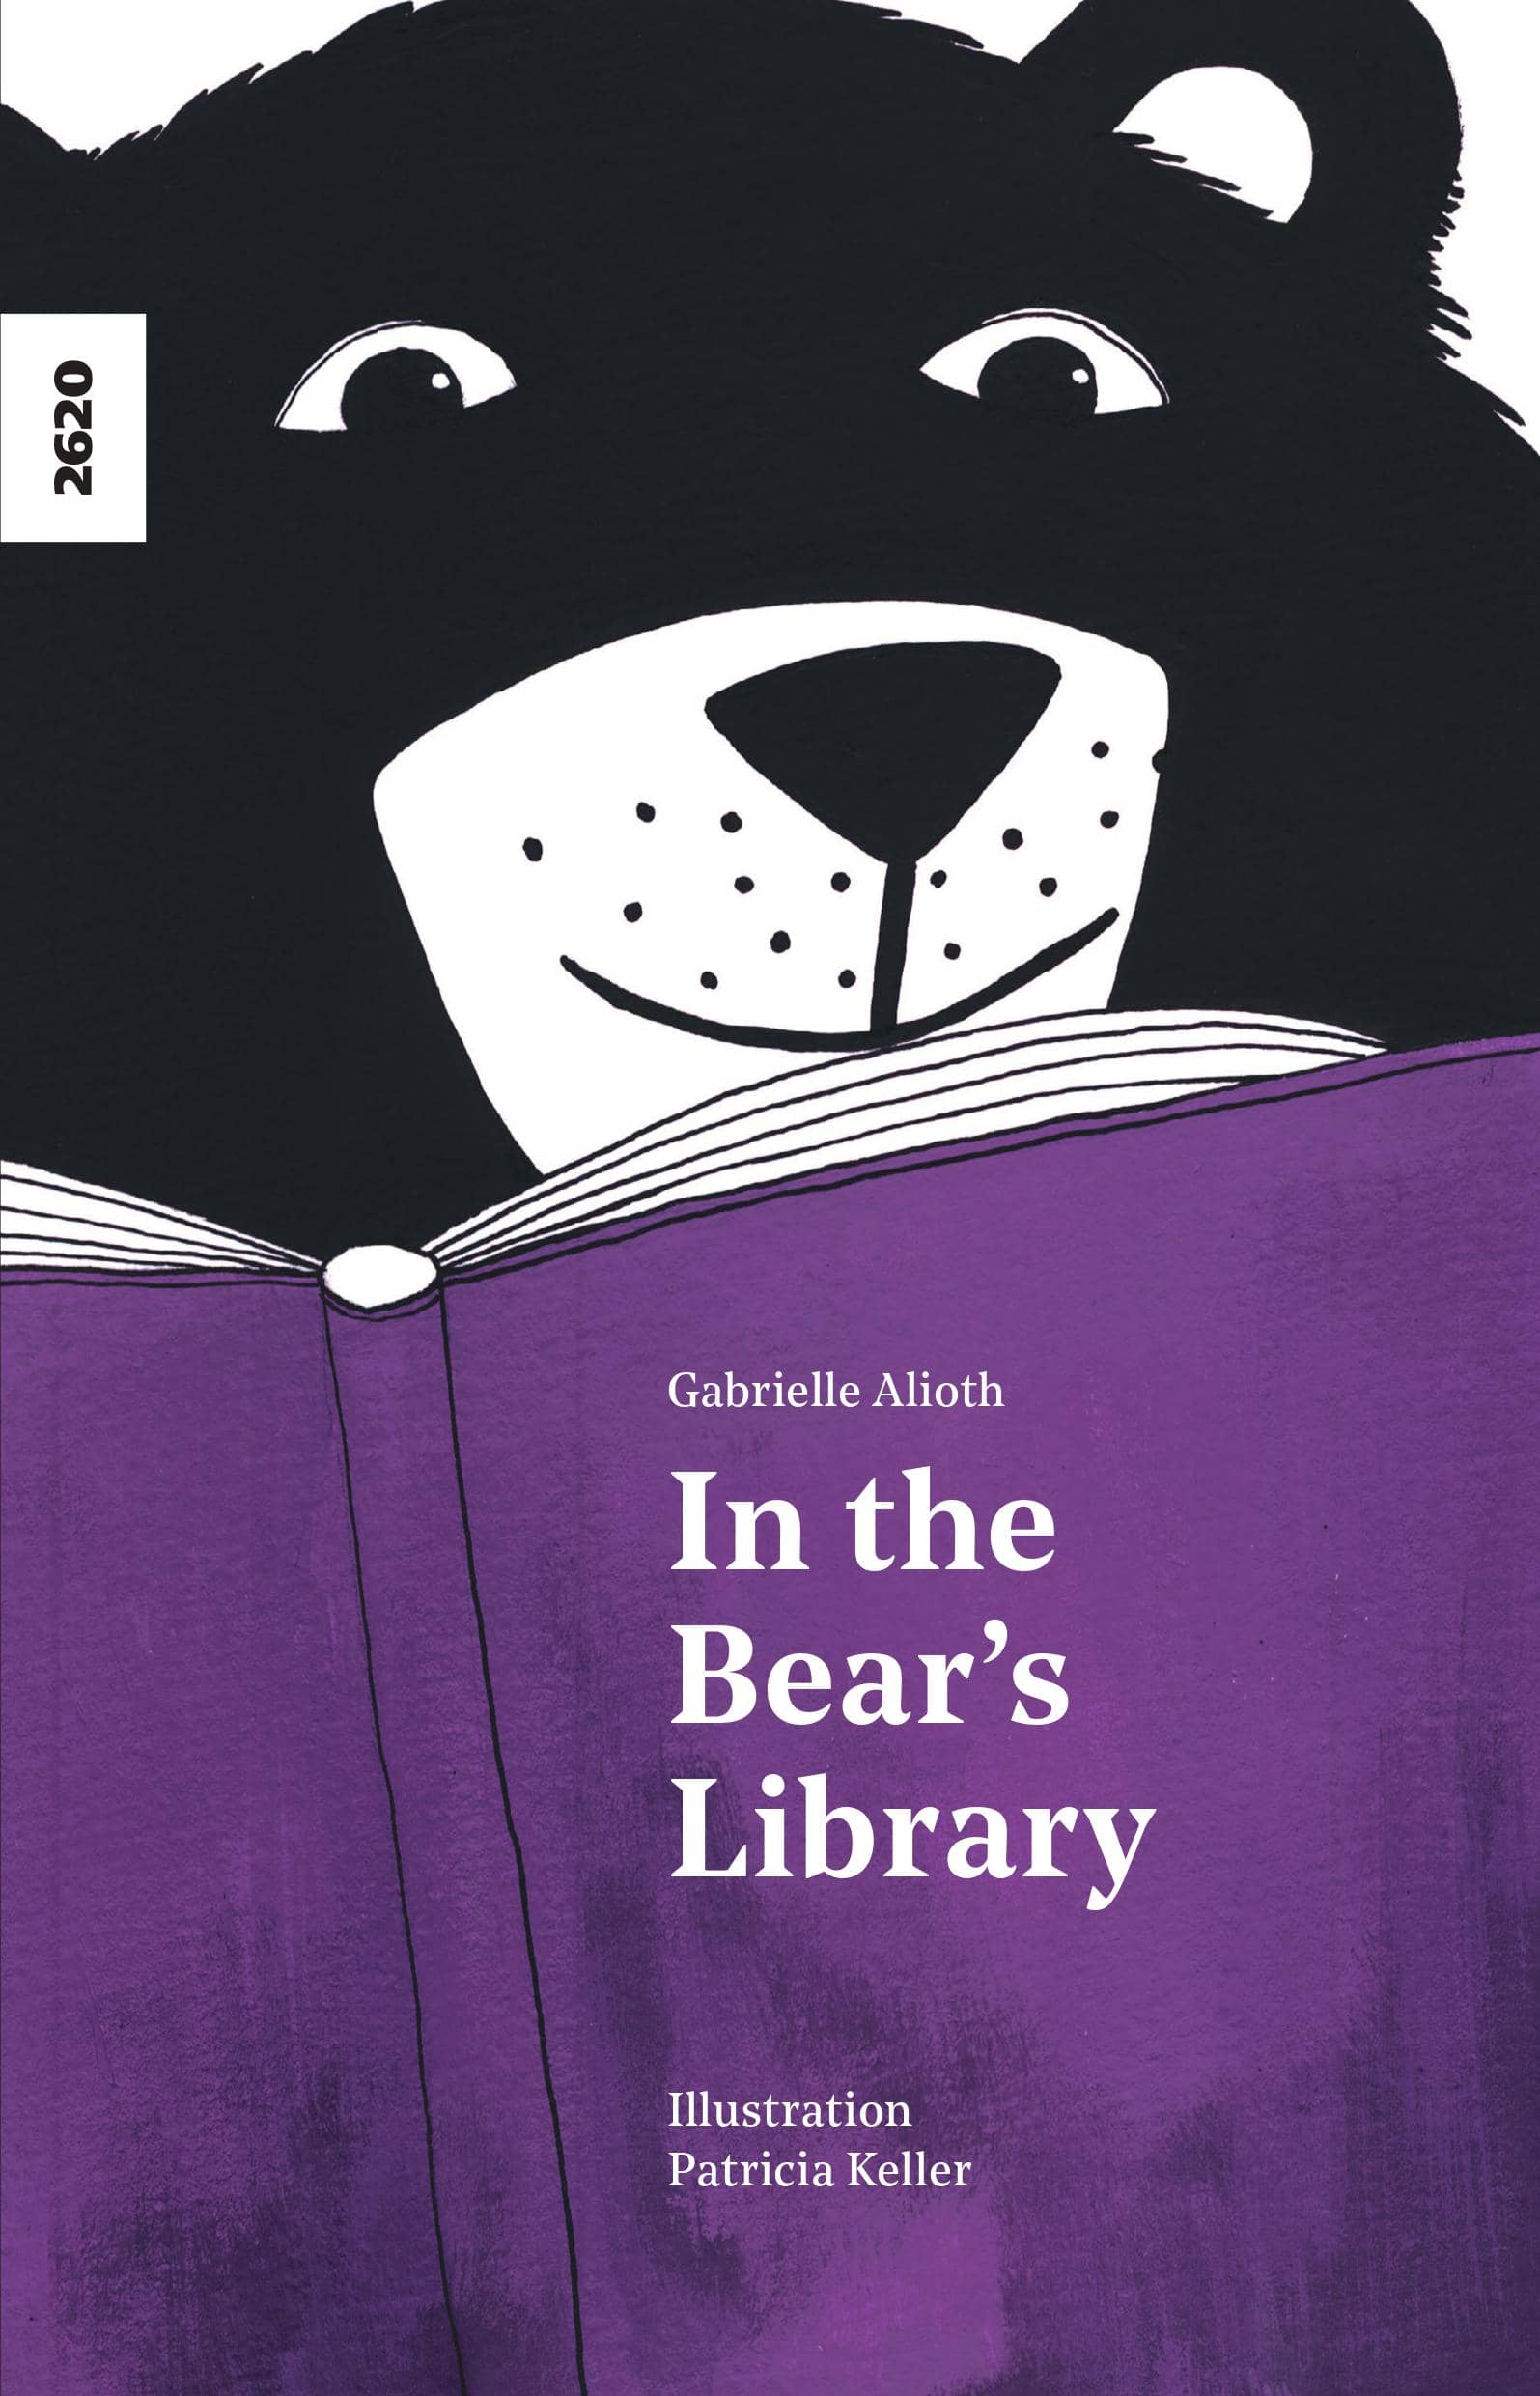 In the Bear's Library